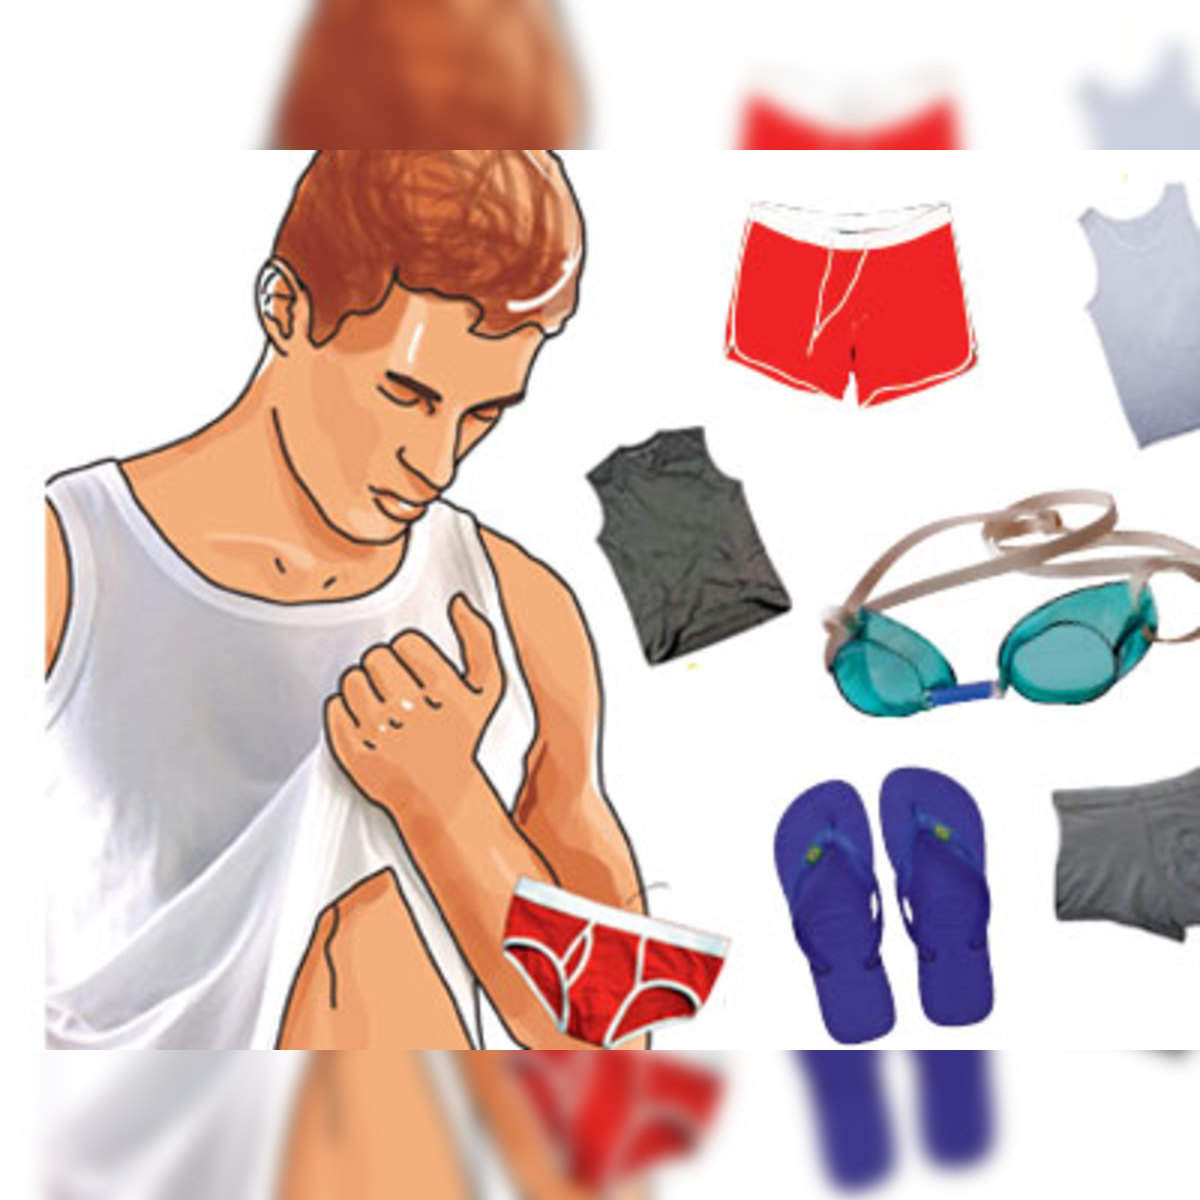 Indian Undergarment Products: Launched the Next Version Vests by